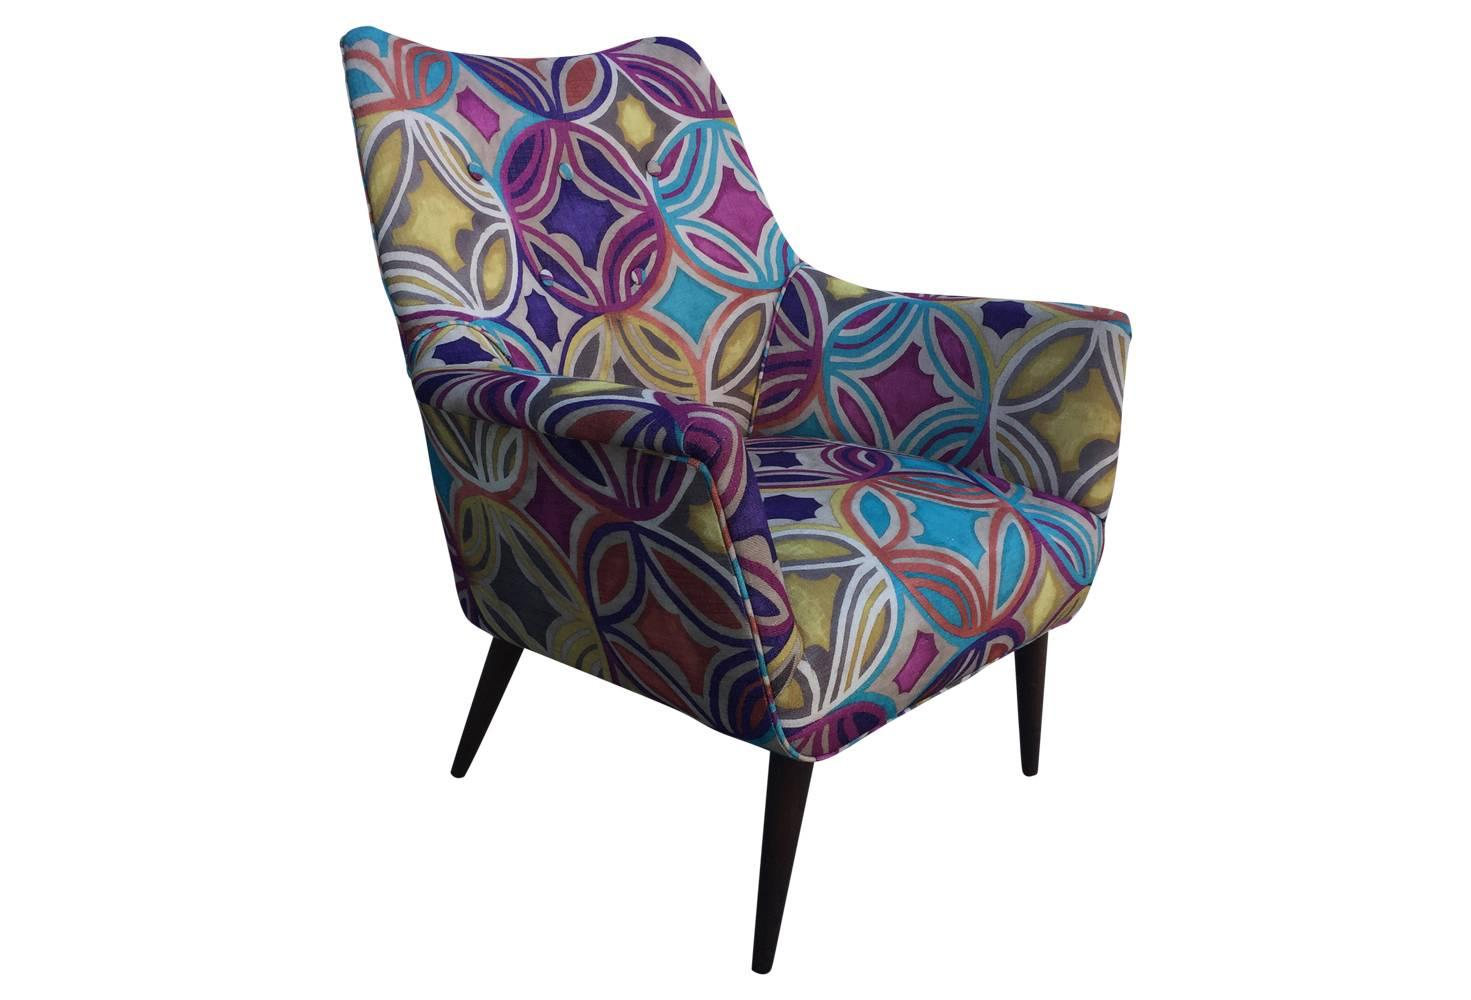 Lovingly restored head to toe Mid-Century Modern Danish chair with walnut legs. Jewel toned upholstery pattern is reminiscent of abstract Expressionist paintings by Ellsworth Kelly.

Measures: Seat height 17 inches.
Seat depth 19 inches.